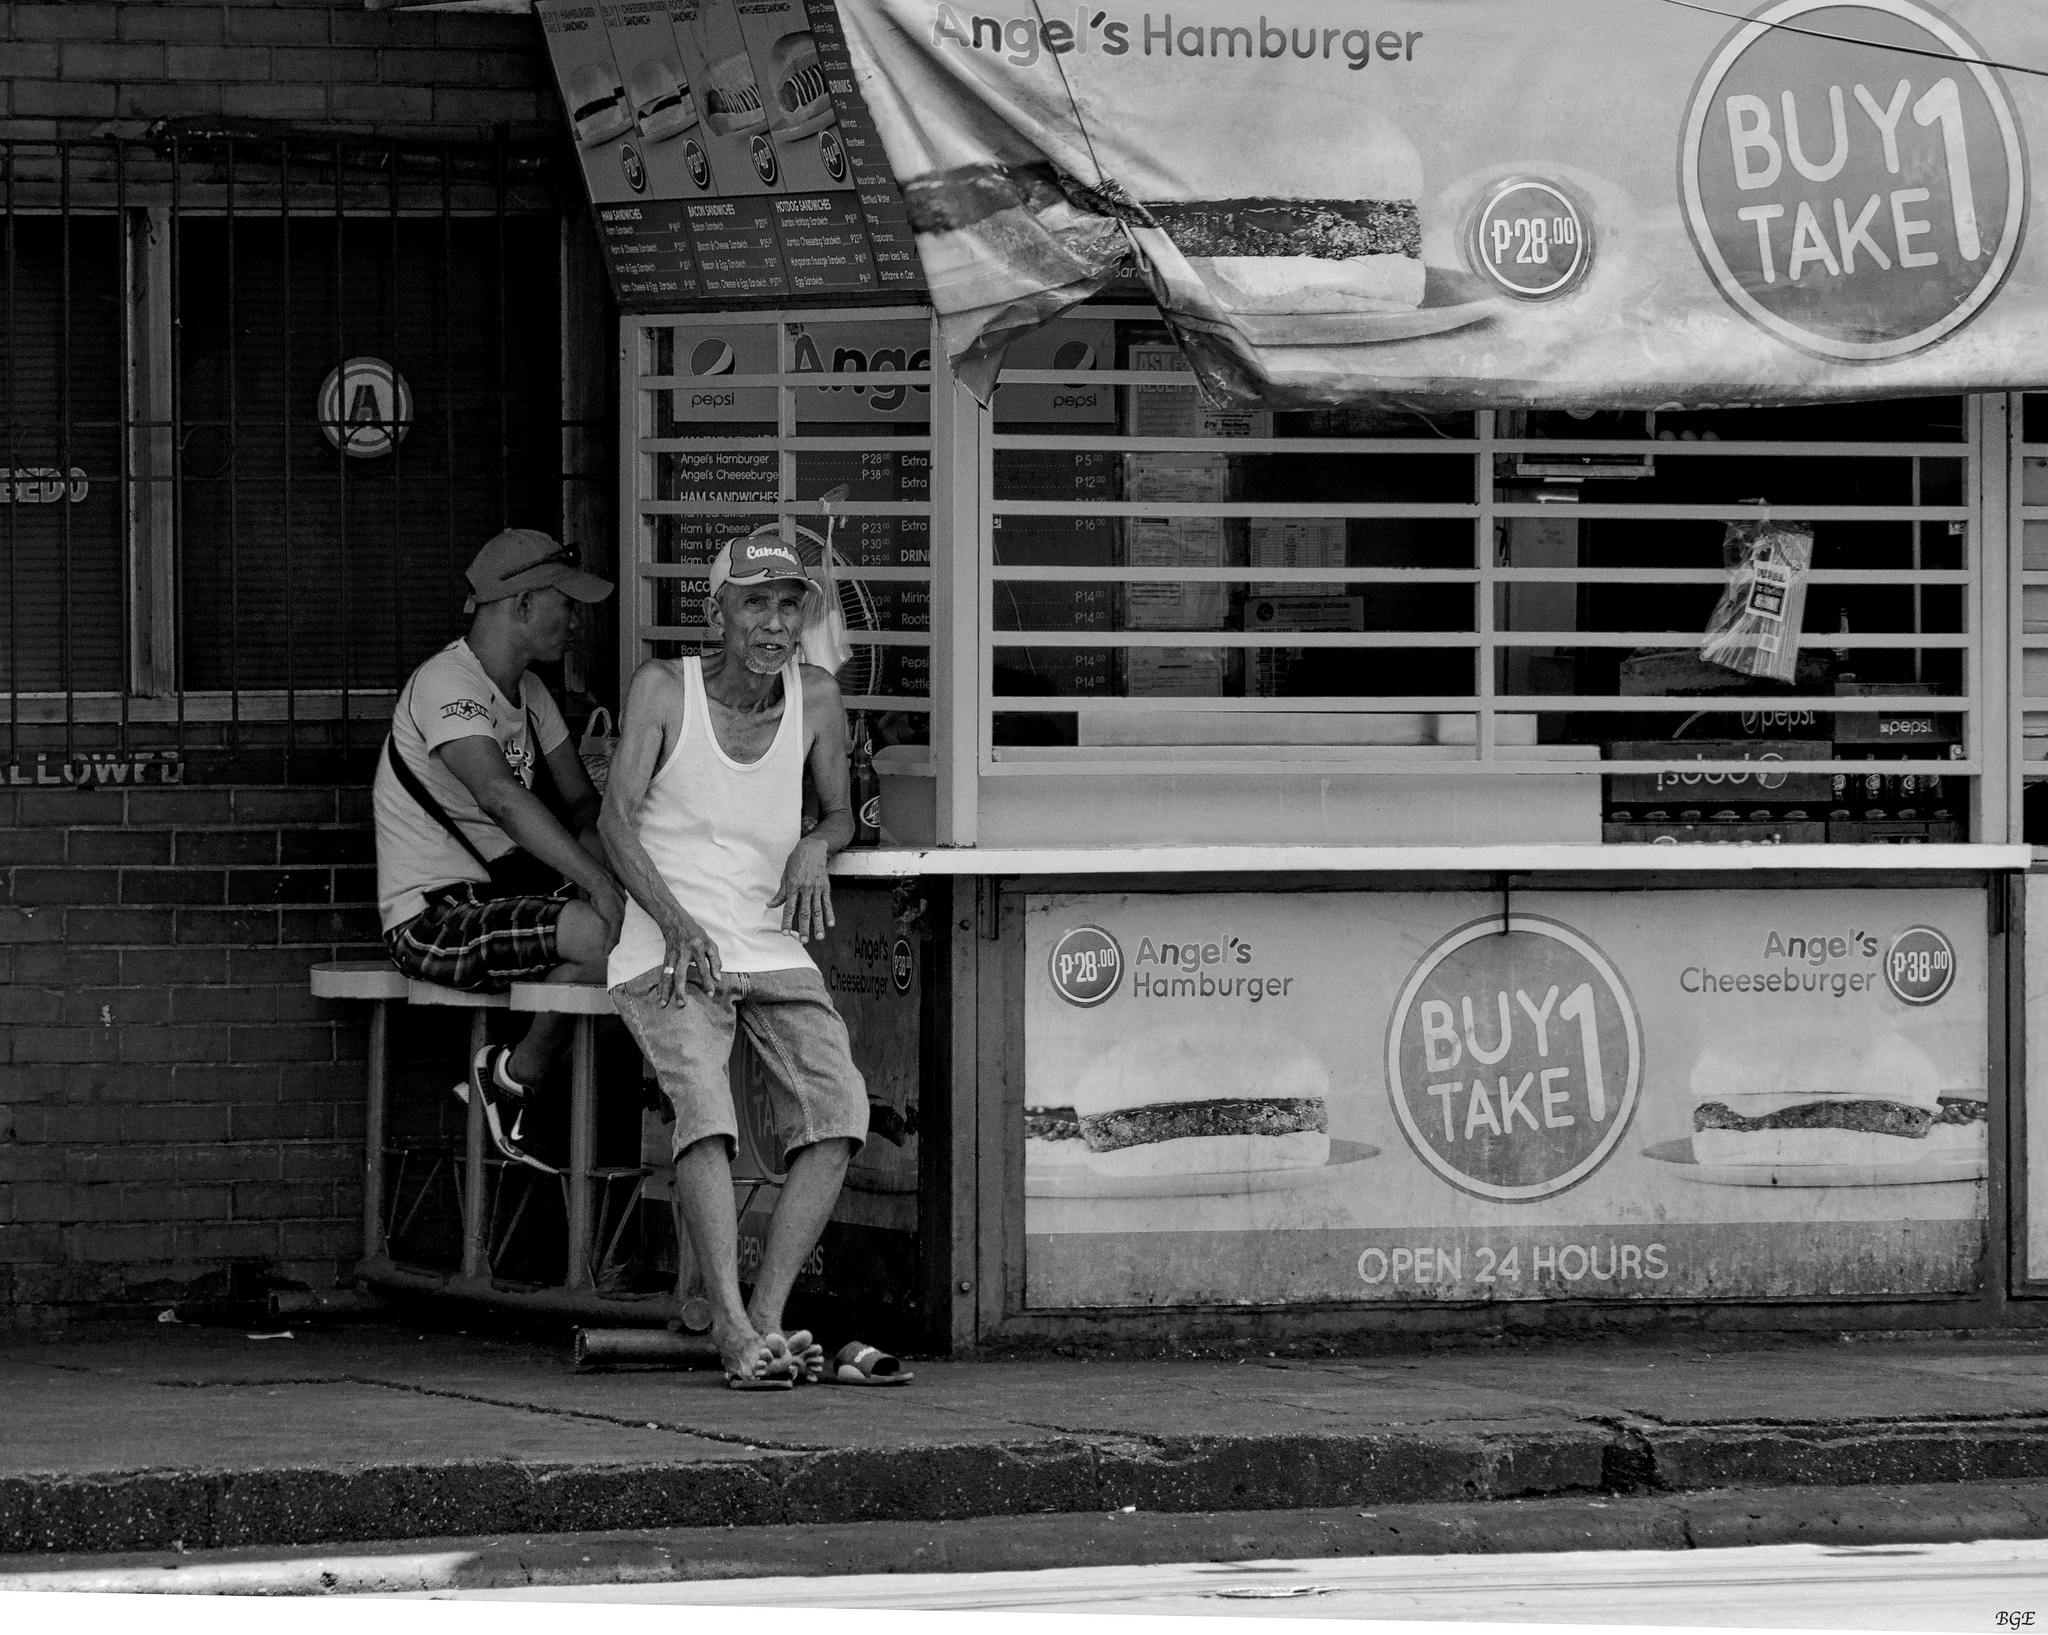 Two old men sitting by a hamburger stand on a street corner, published to 